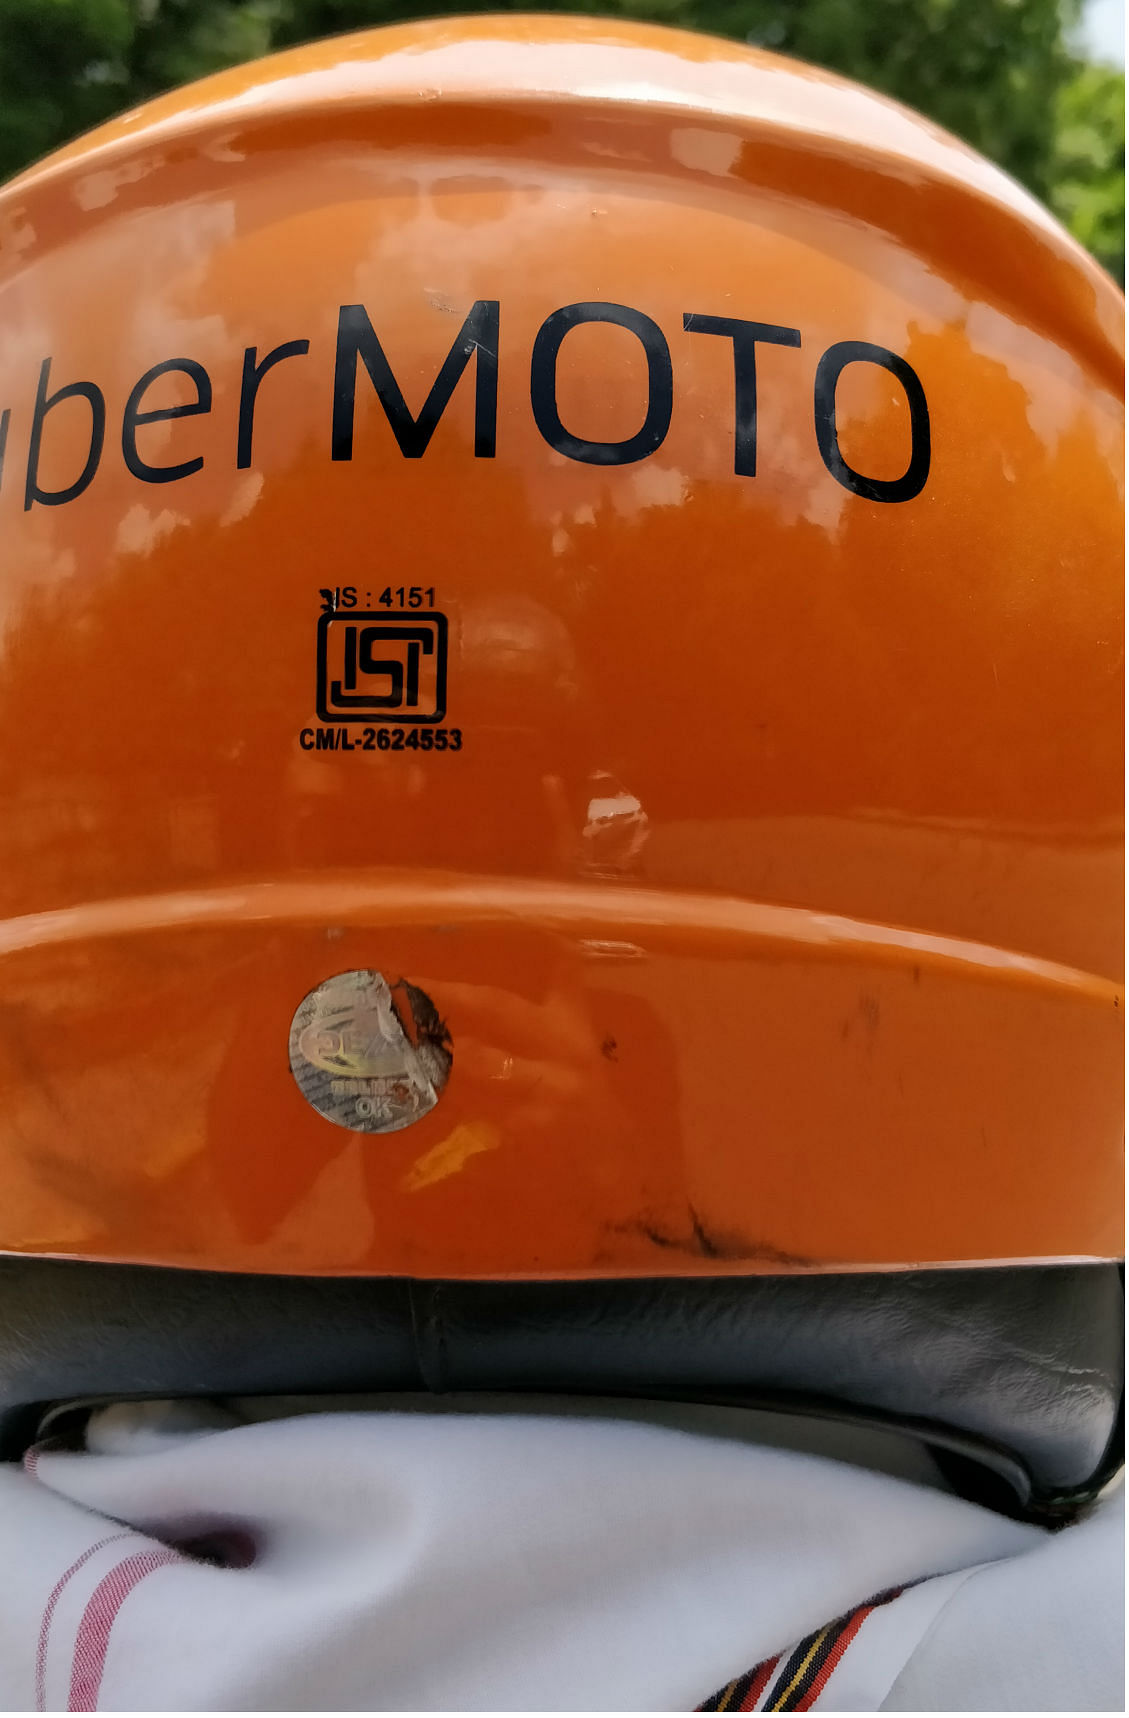 My Ride With UberMoto: Never Thought Bike Taxis Can be Fun u0026 Safe